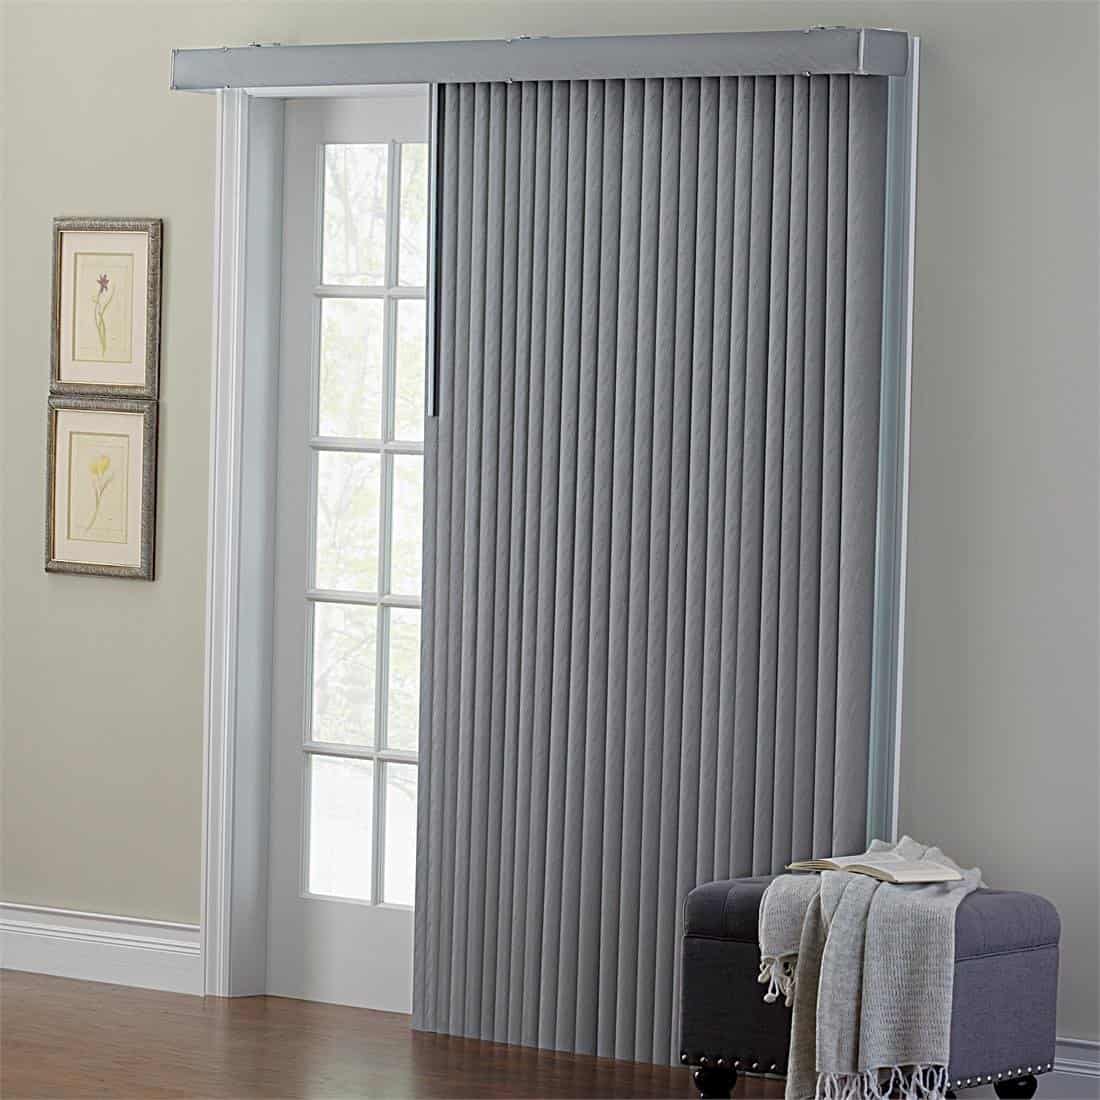 Window Treatments For Sliding Glass, Sliding Door Blinds Curtains